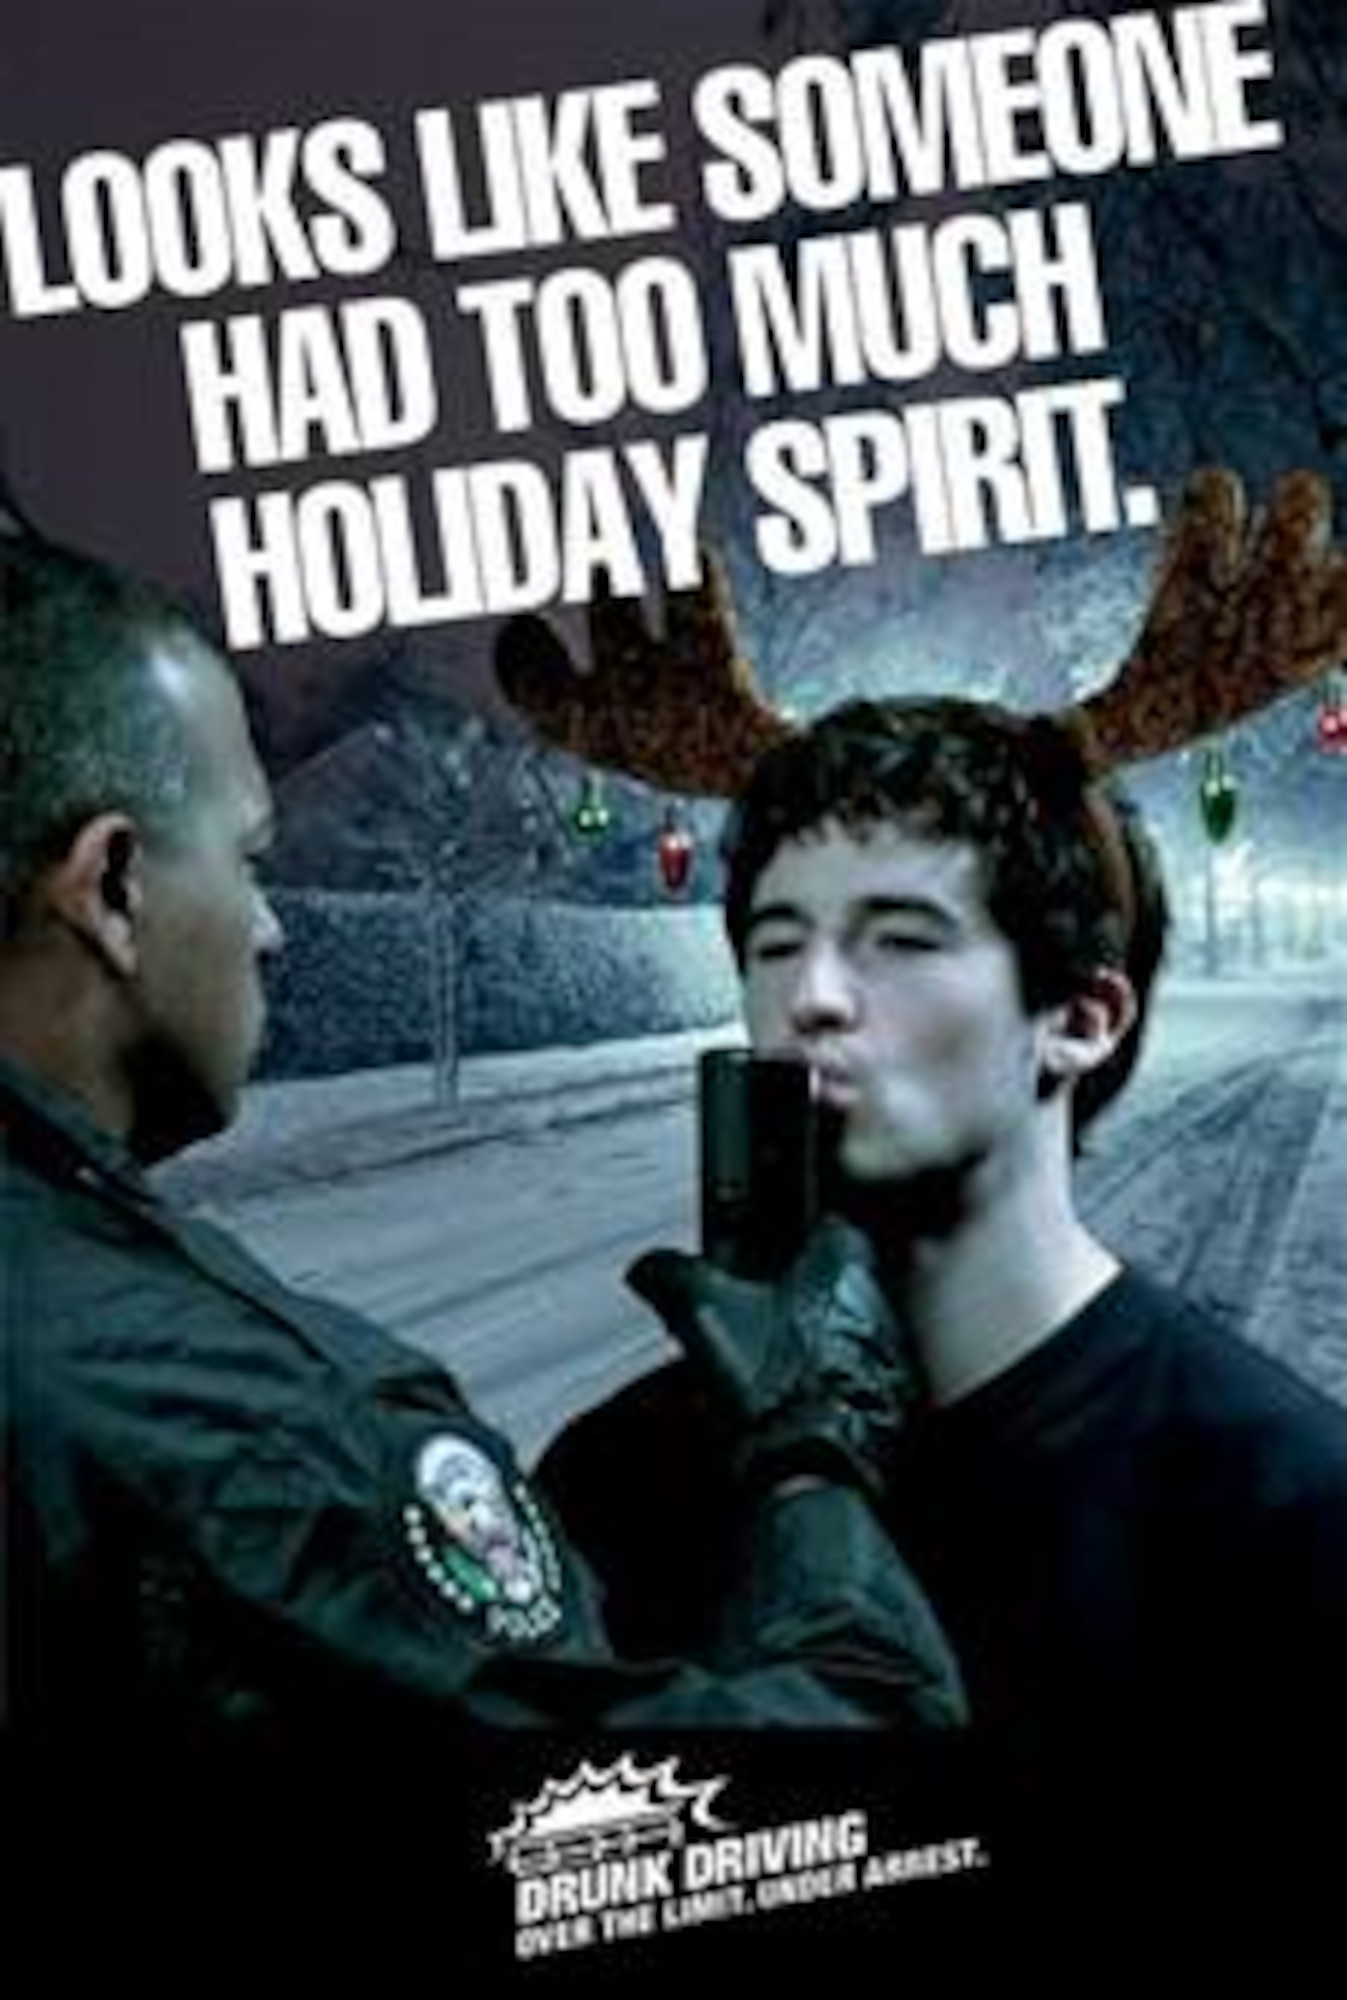 Holiday Drinking & Driving Campaign